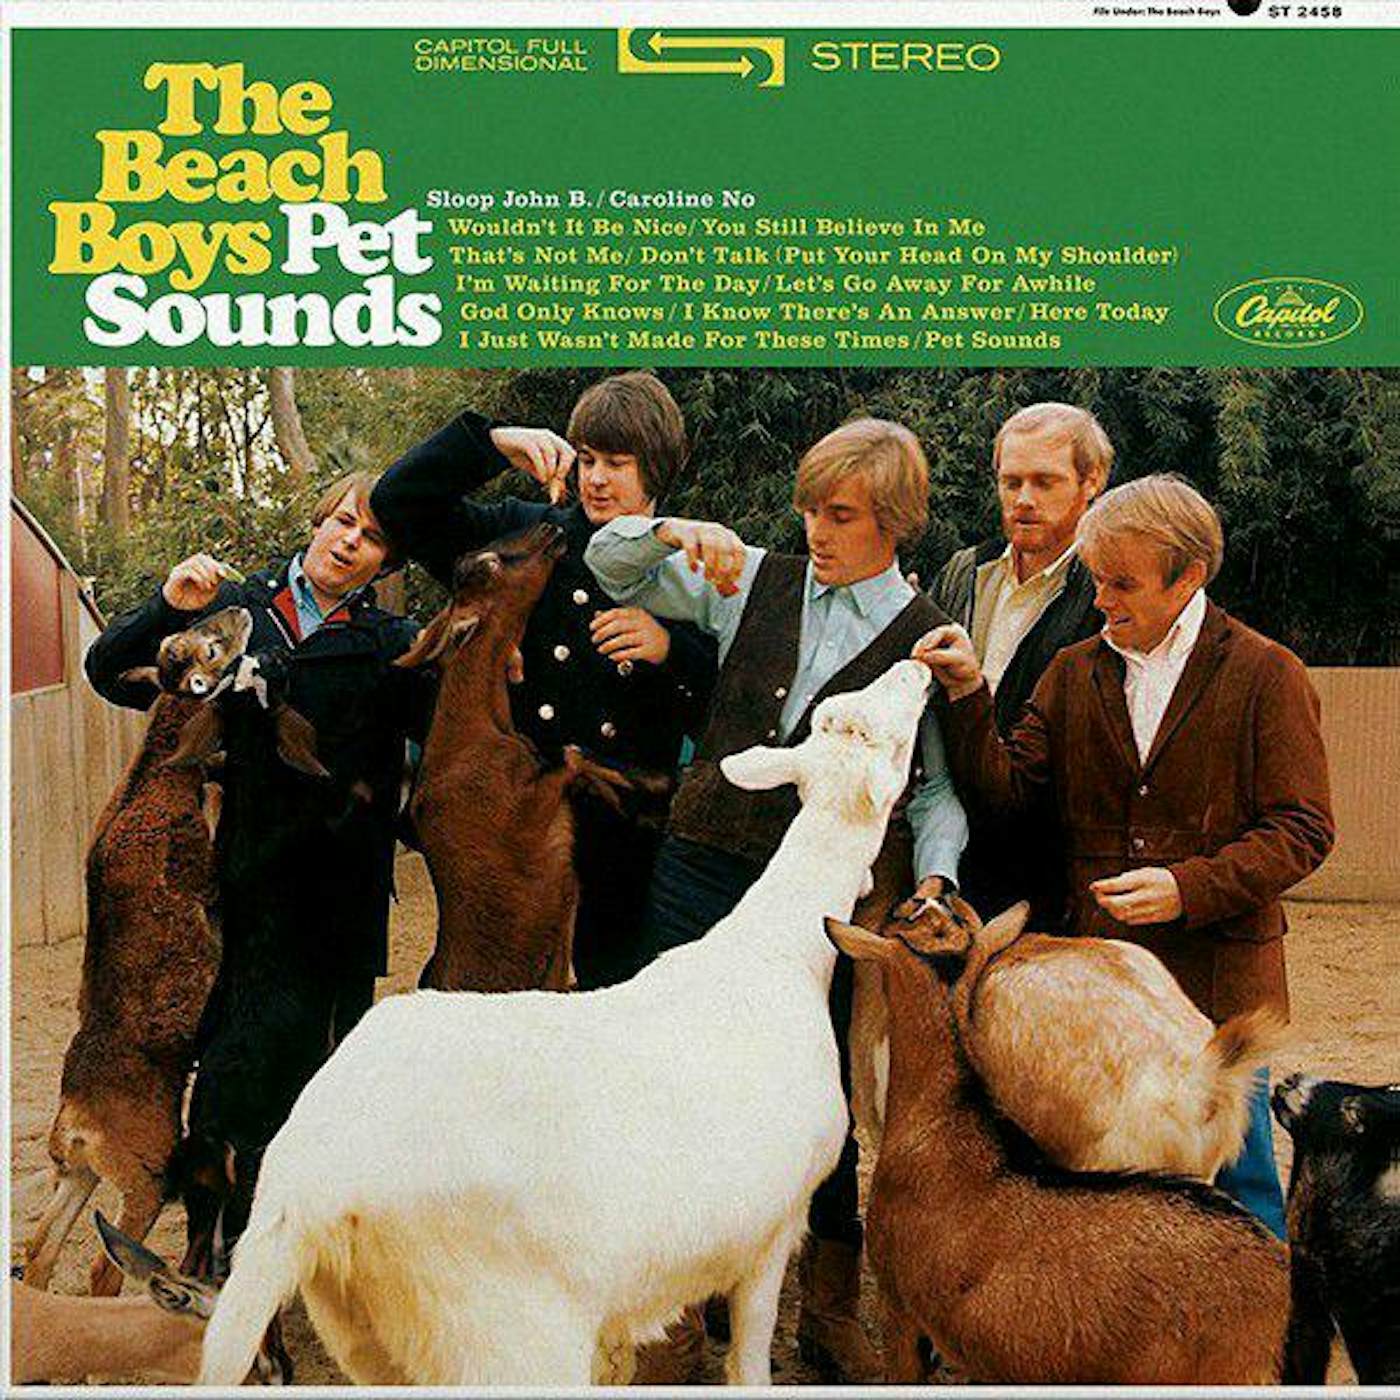 The Beach Boys Pet Sounds (Limited/180g/Stereo) Vinyl Record